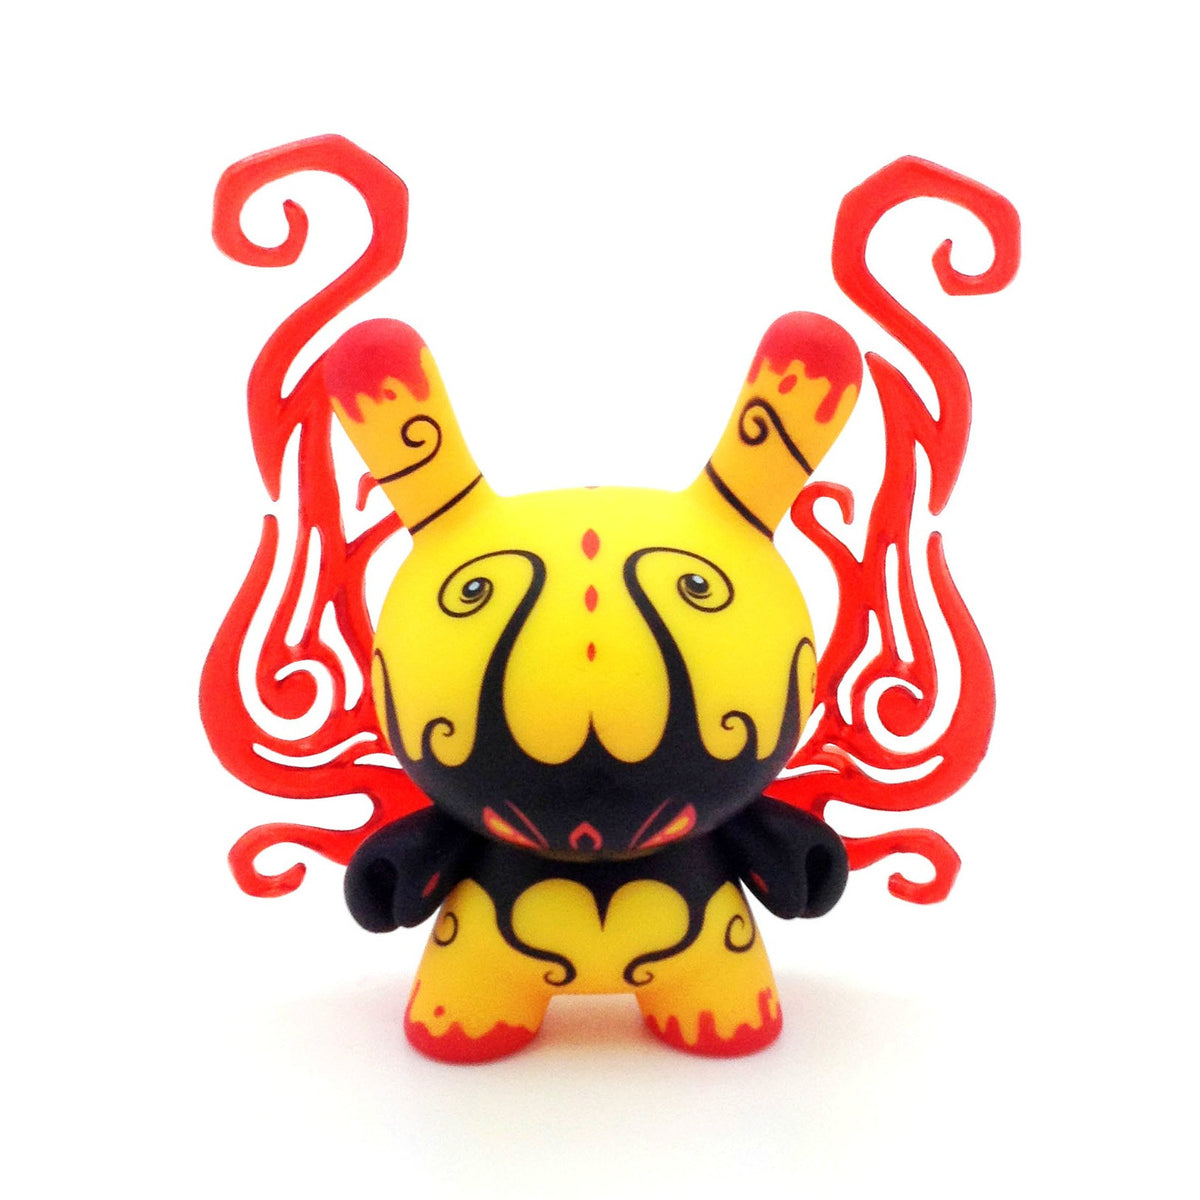 Side Show Dunny Series - Deeper Issues Yellow (Andrew Bell) - Mindzai
 - 1